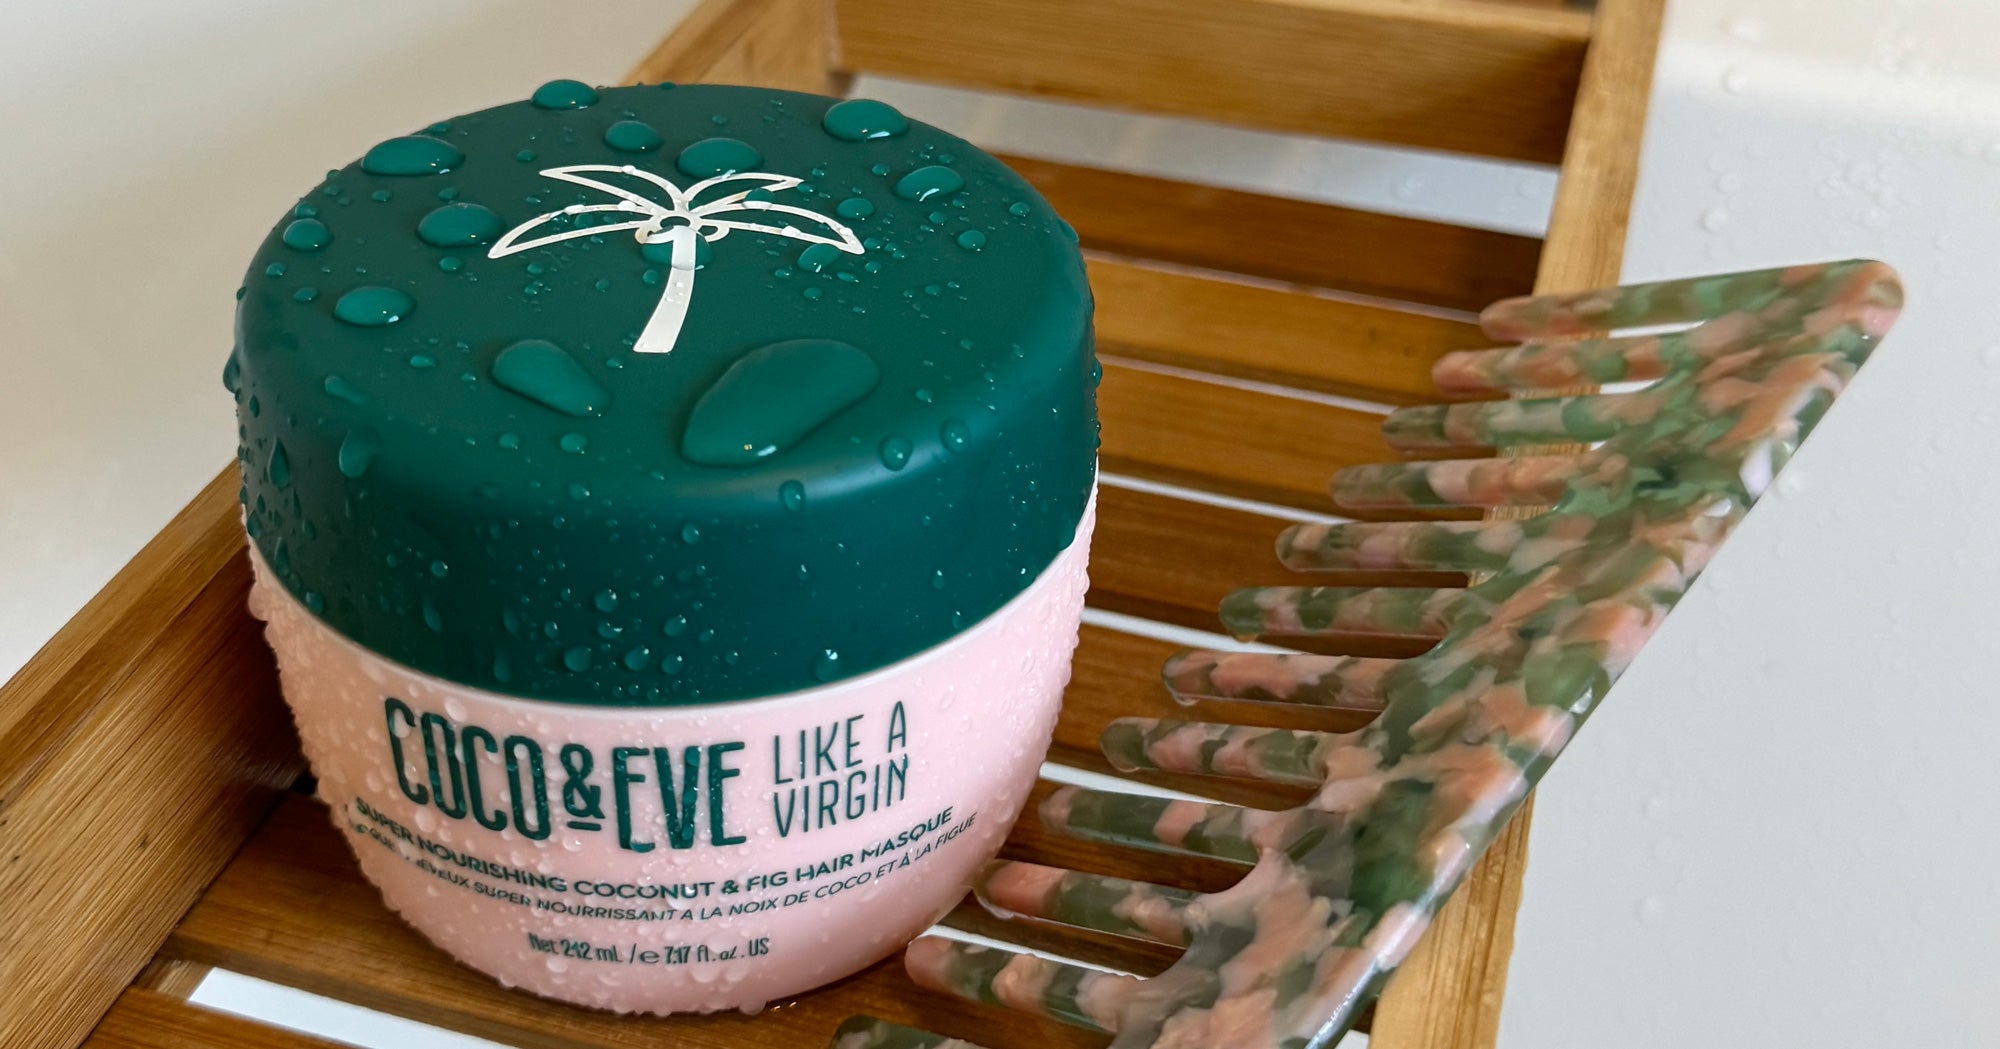 We Tested Coco & Eve’s Like A Virgin Hair Masque